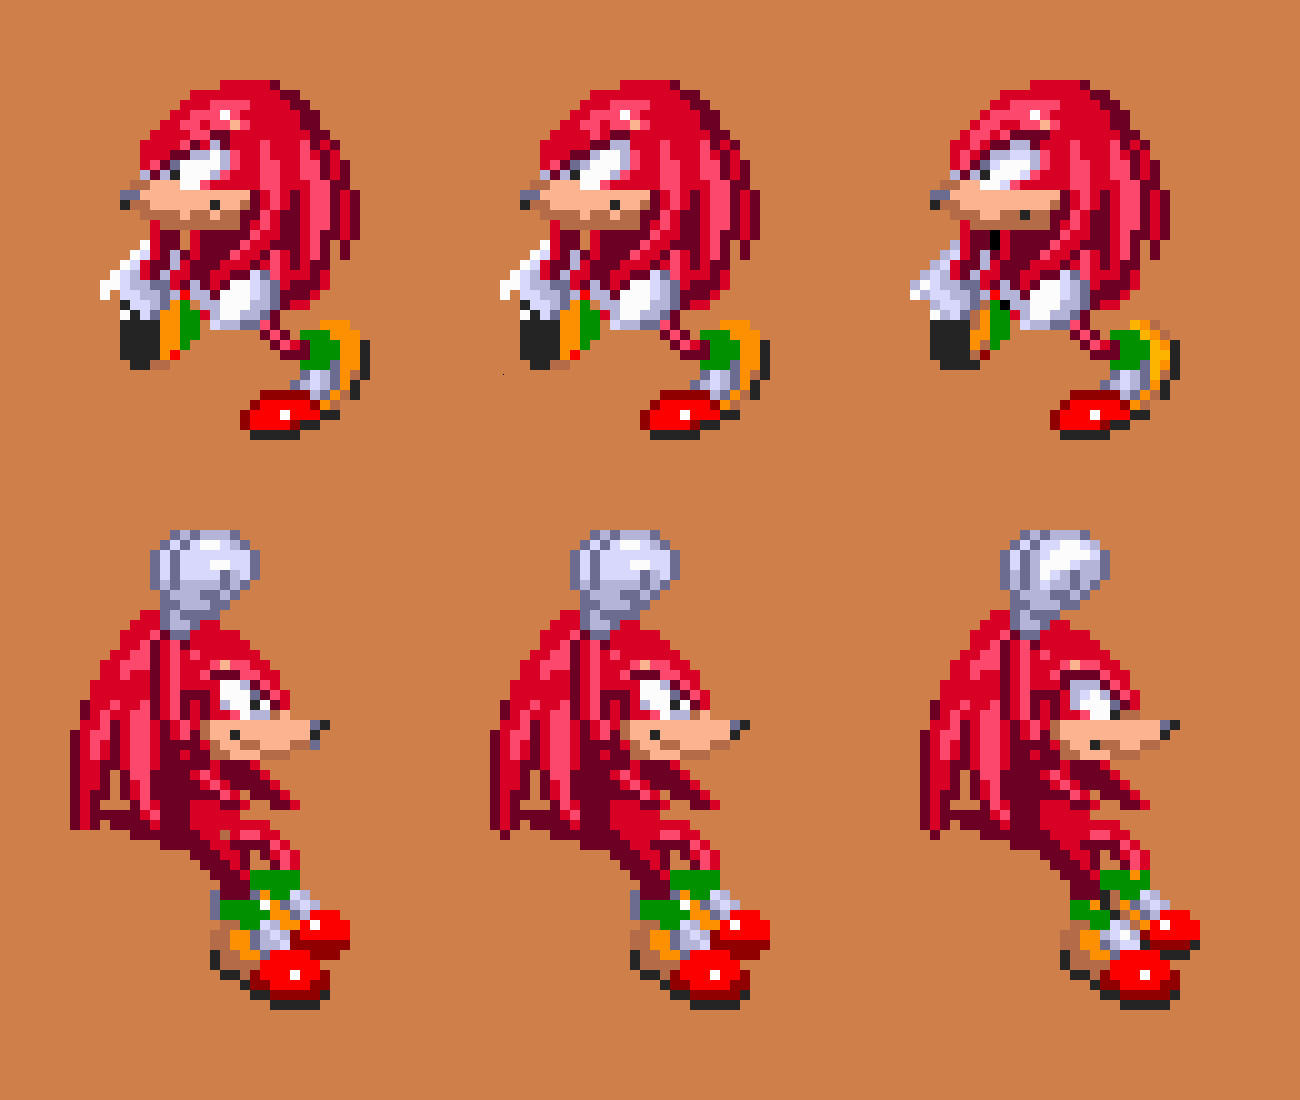 Sonic 3 and Knuckles Sprites. Спрайты НАКЛЗА. Sonic 3 and Knuckles Knuckles Sprites. Sonic 3 Knuckles NPC Knuckles Sprite. Sonic 3 air extra slots